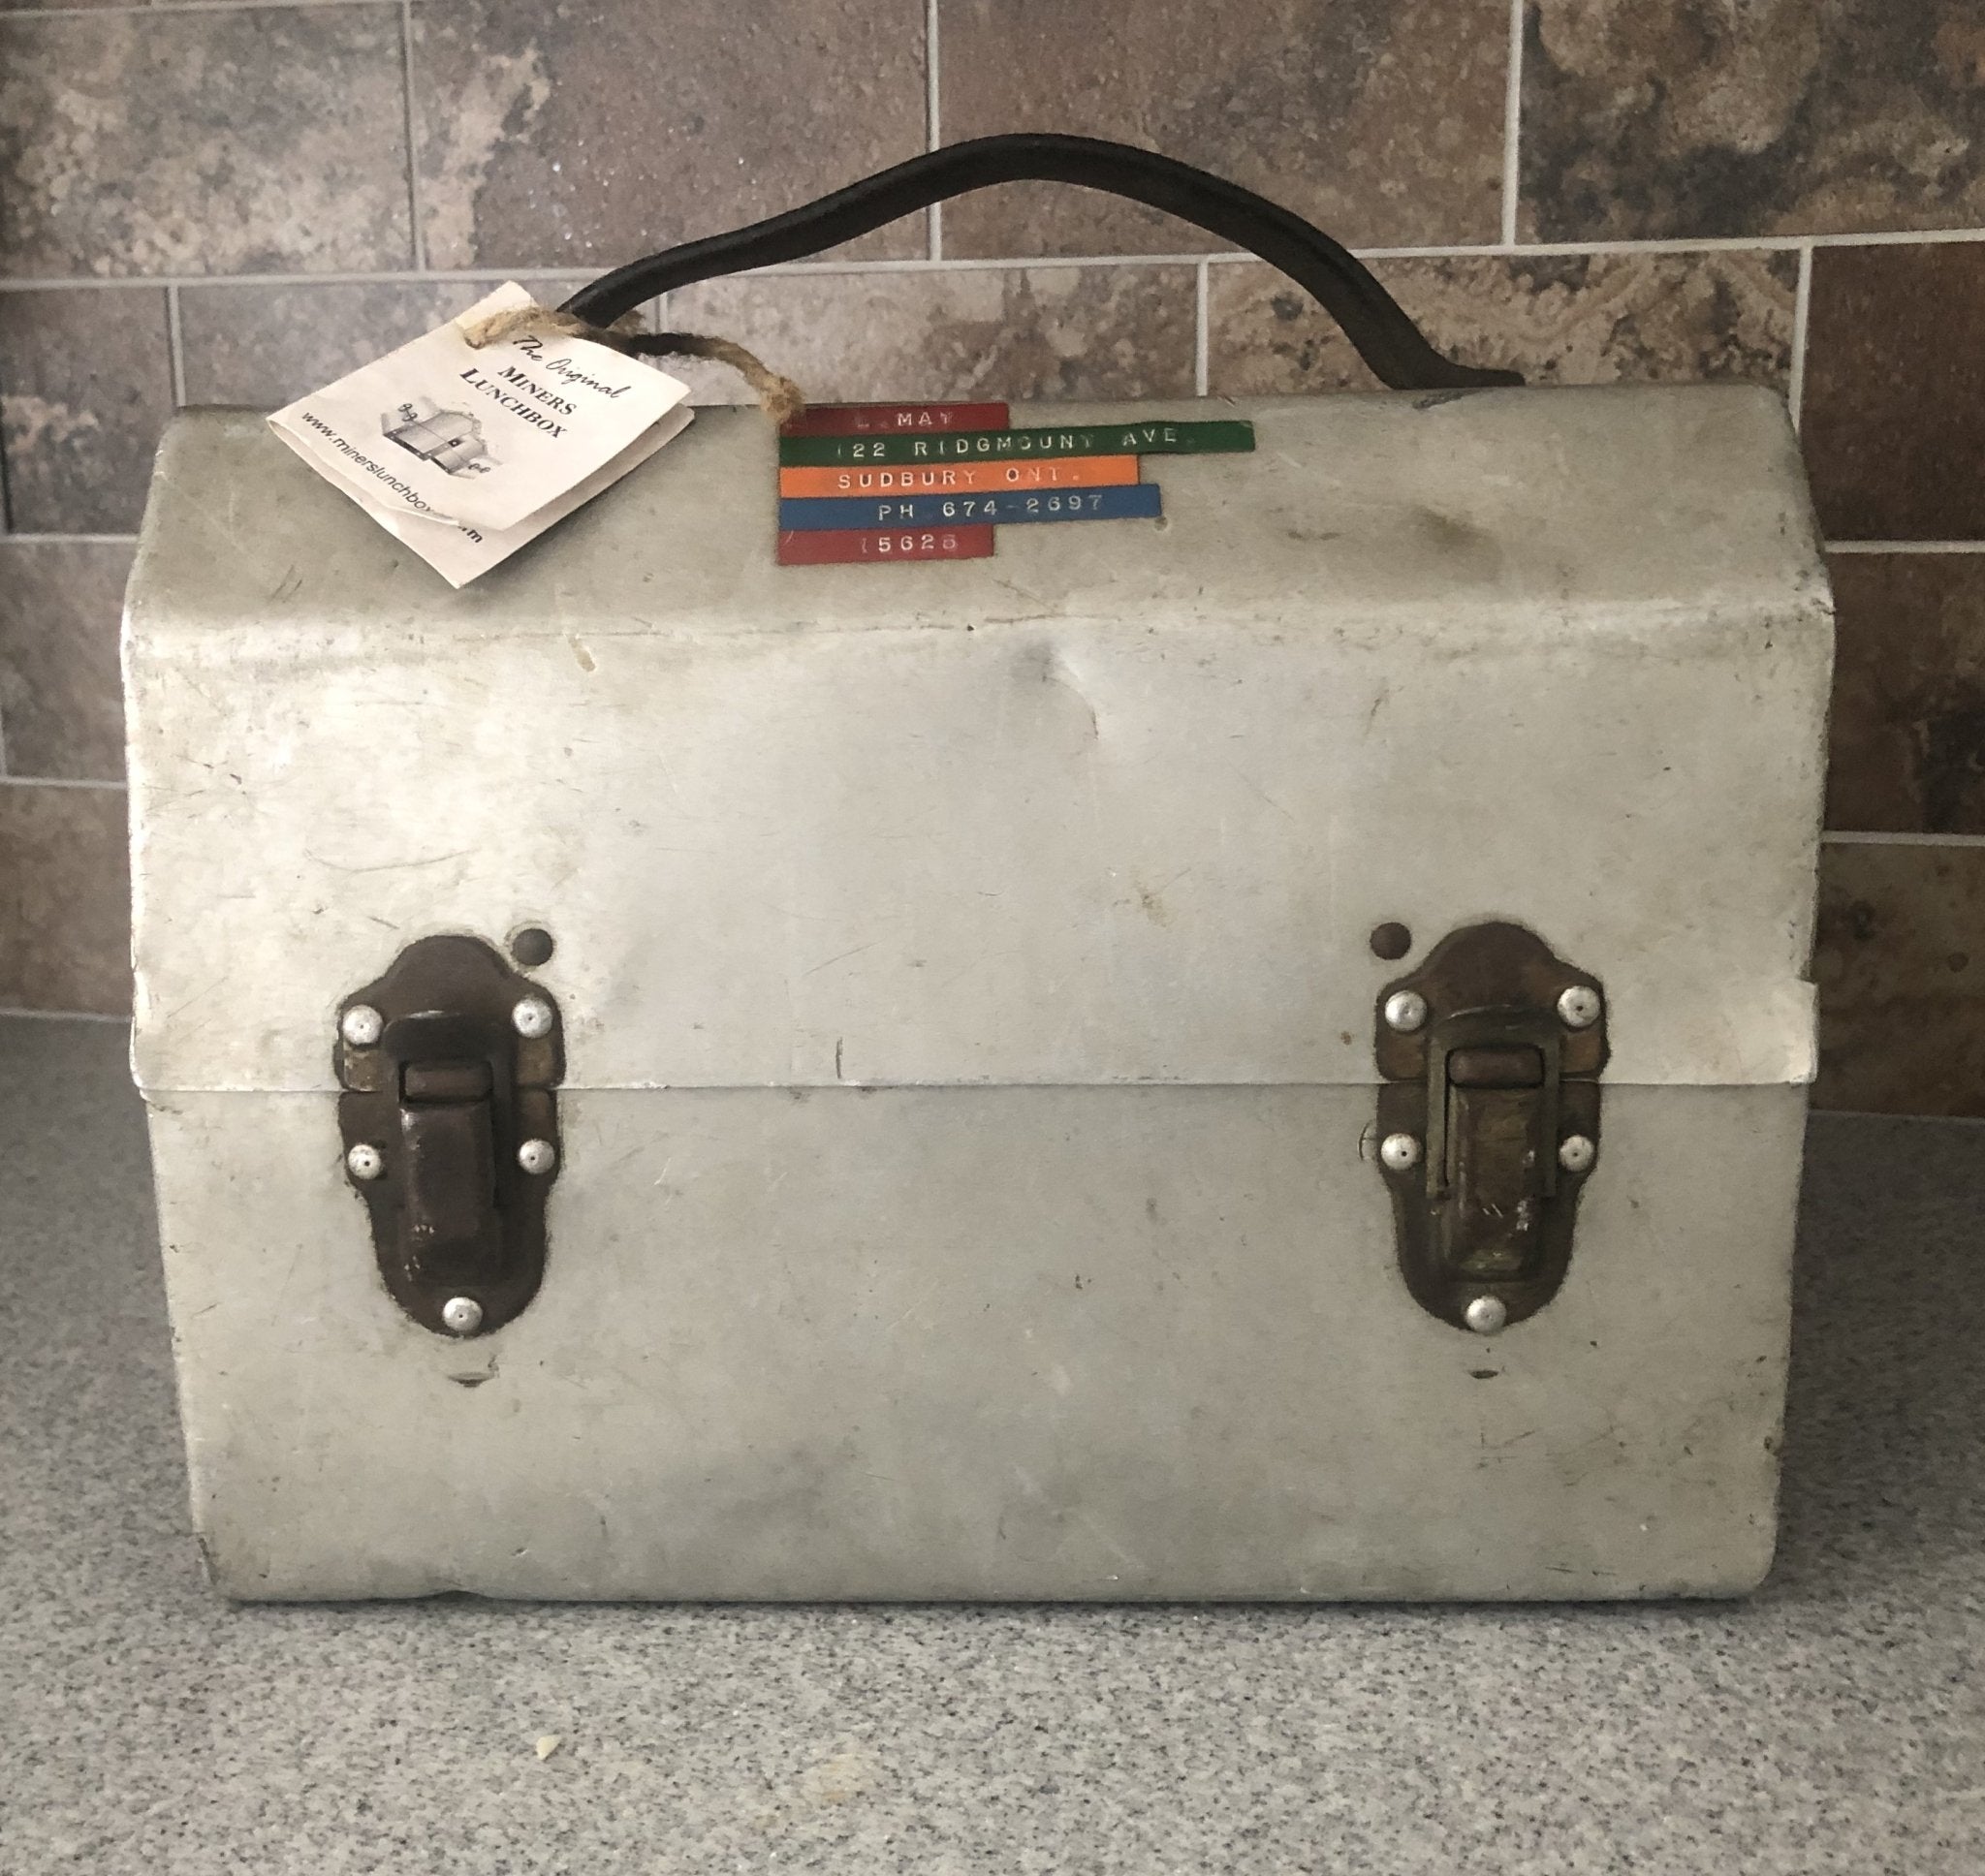 the first L. May lunchbox built in 1956